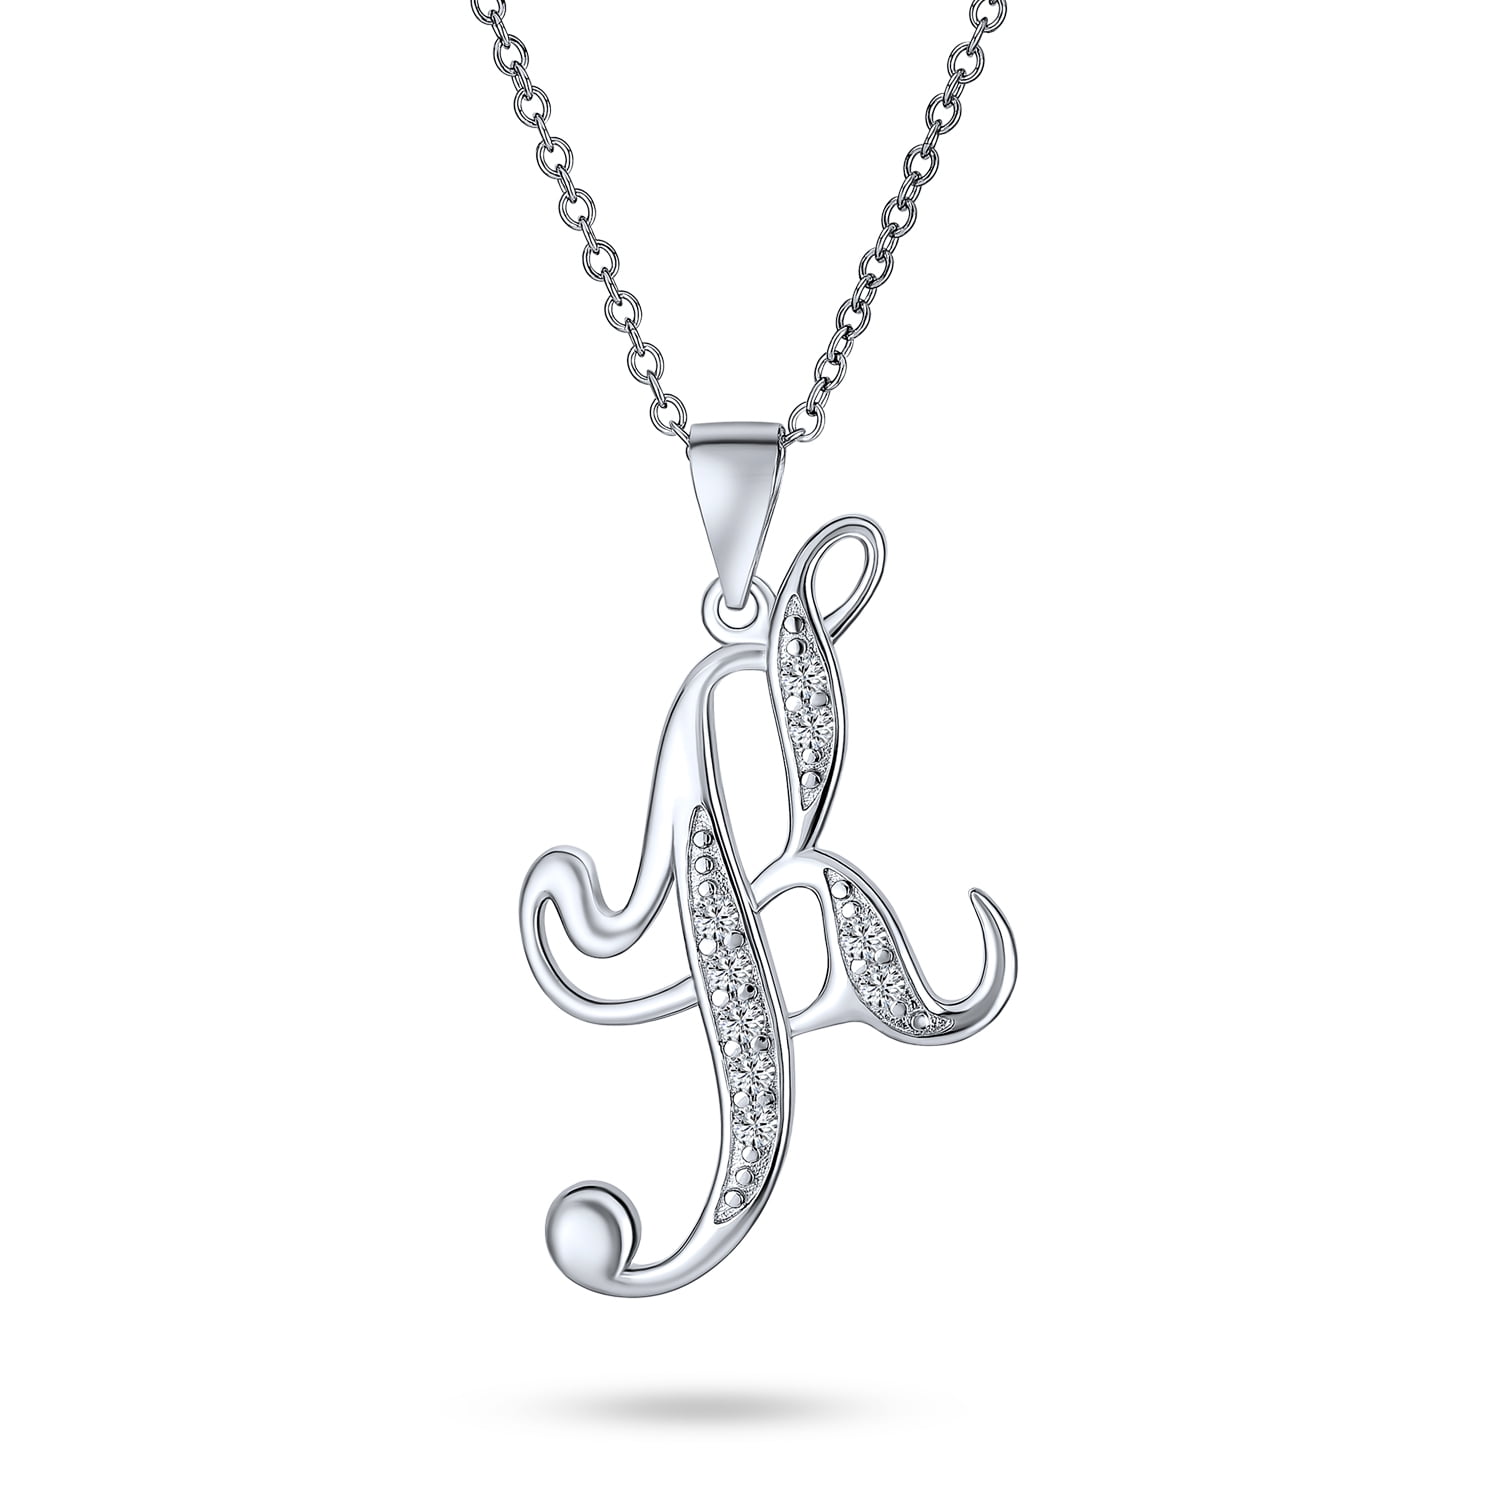 BEAUTIFUL ALPHABET INITIAL LETTER CHARM 925 STERLING SILVER PEDANT LETTER K 